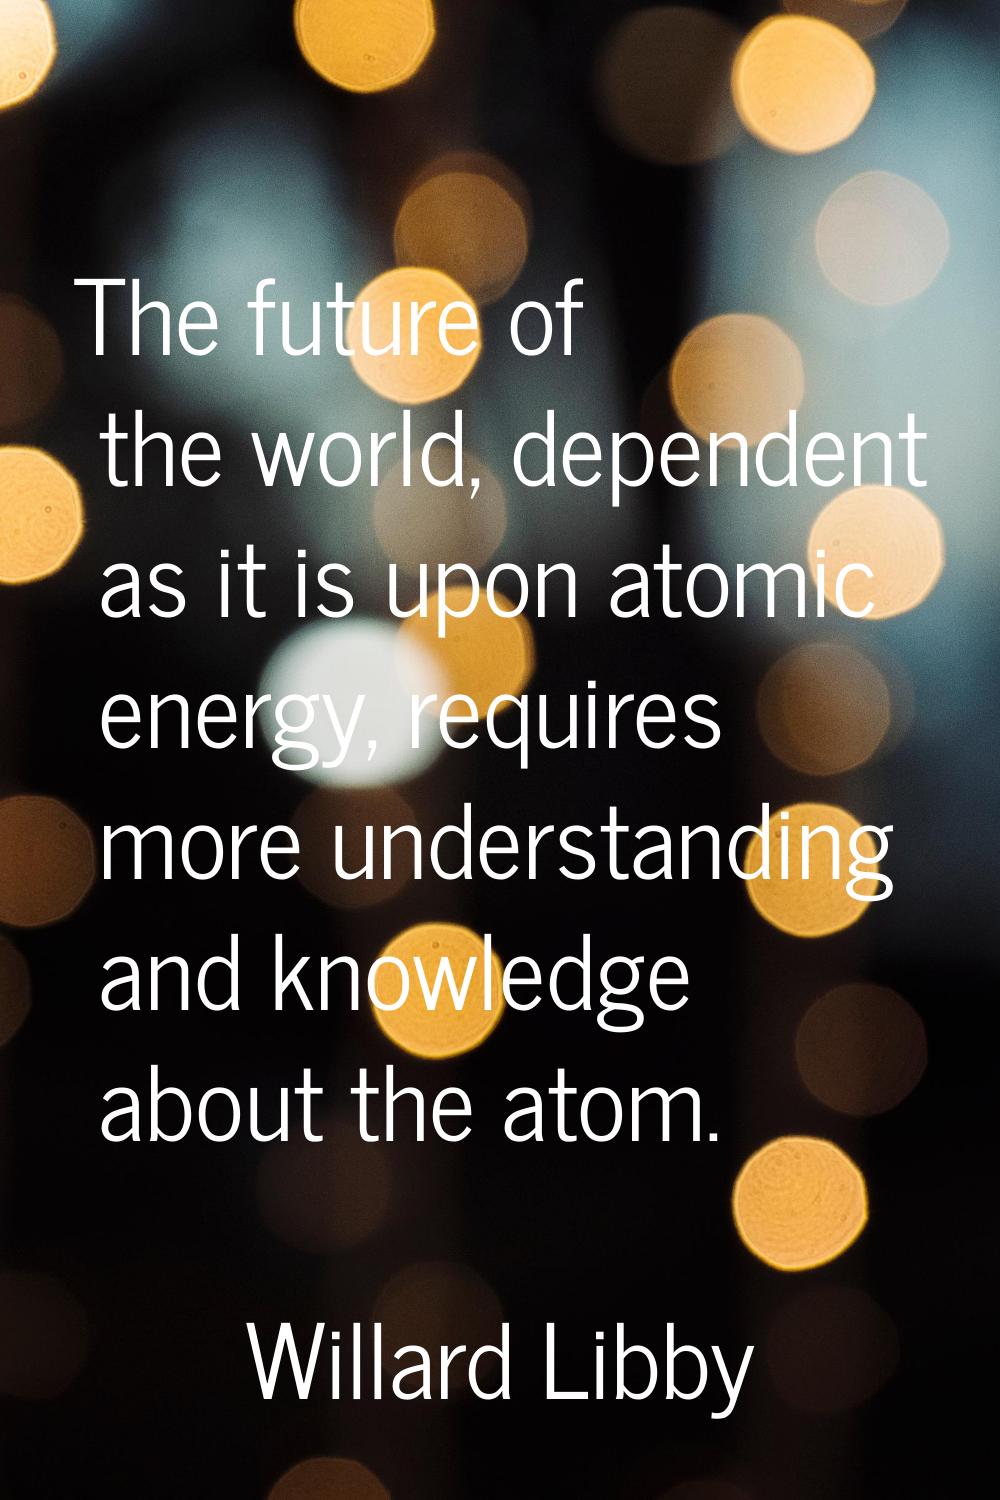 The future of the world, dependent as it is upon atomic energy, requires more understanding and kno